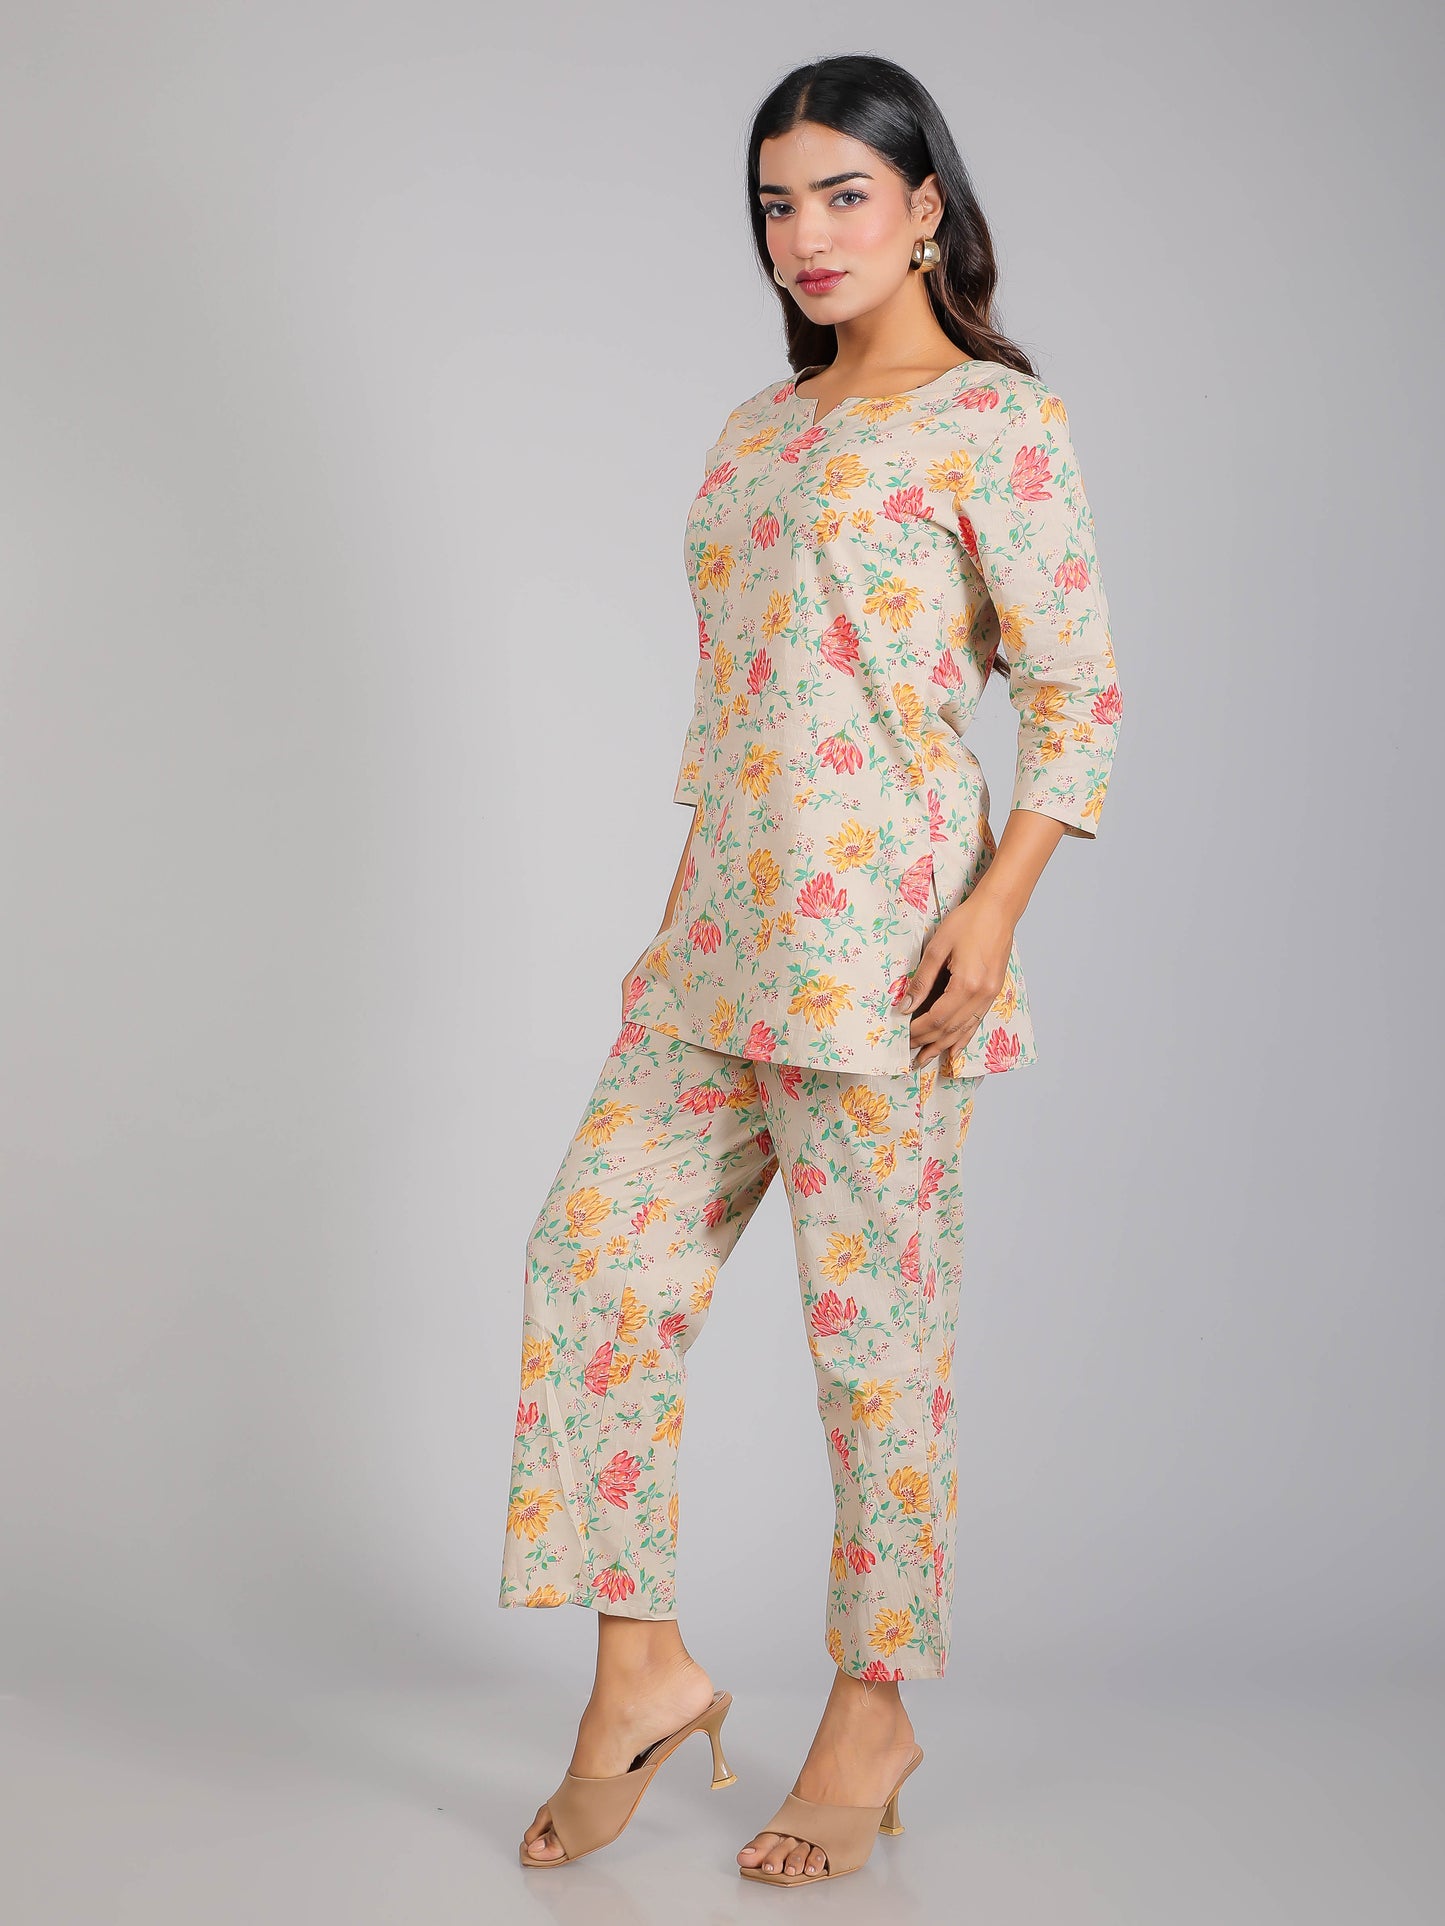 Floral Print on Grey Cotton Lounge Set for Women